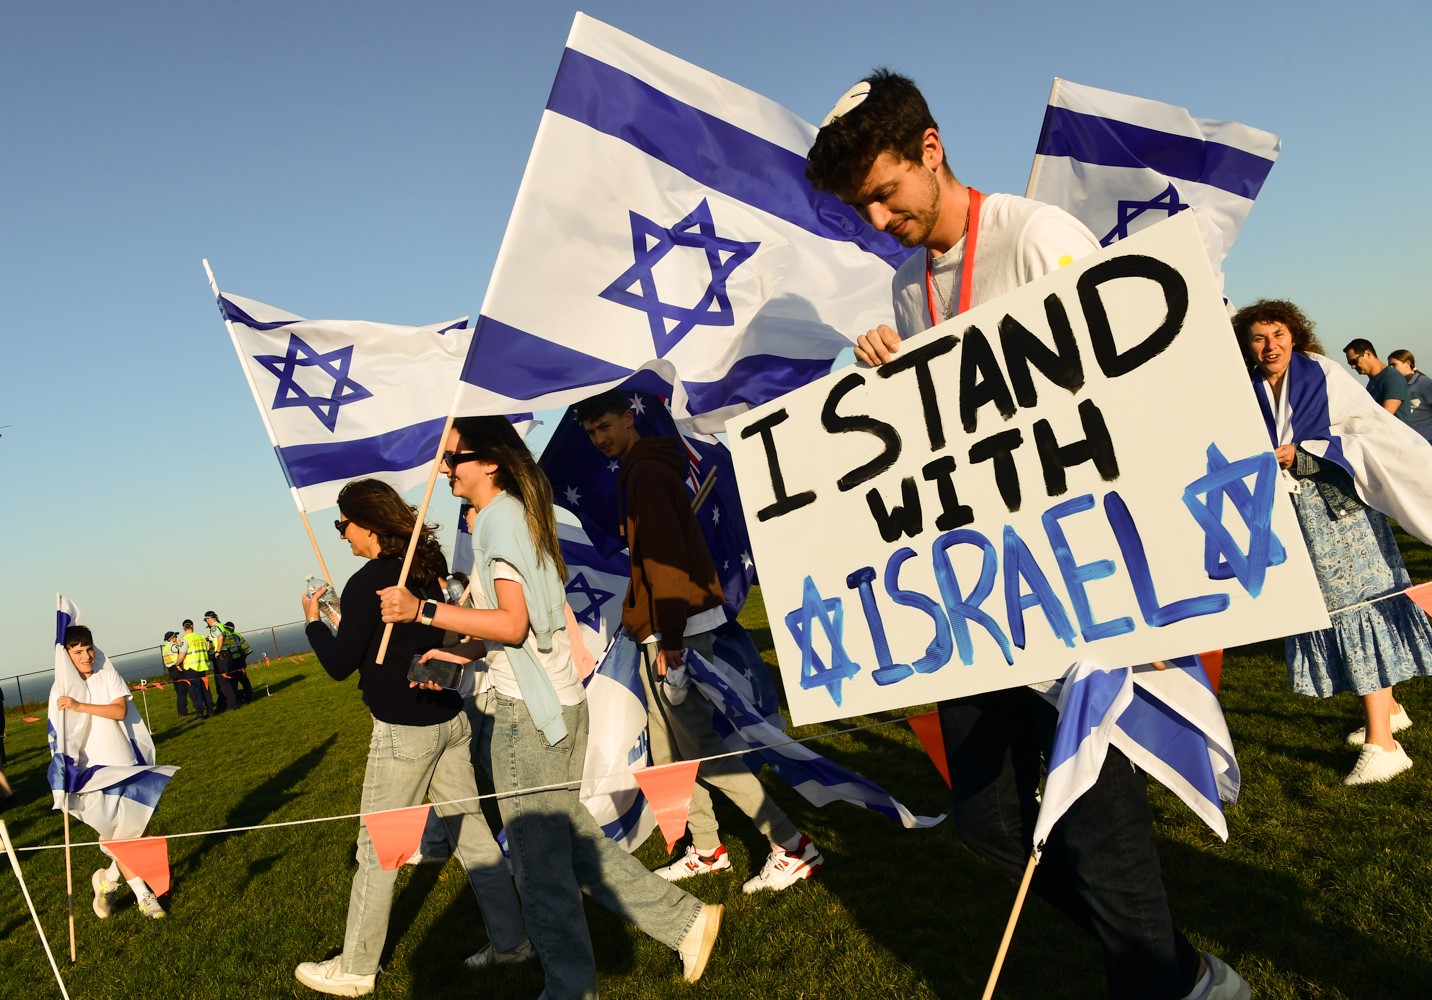 People are pictured carrying Israelian flags and carrying a sign that says 'I stand with Israel' 